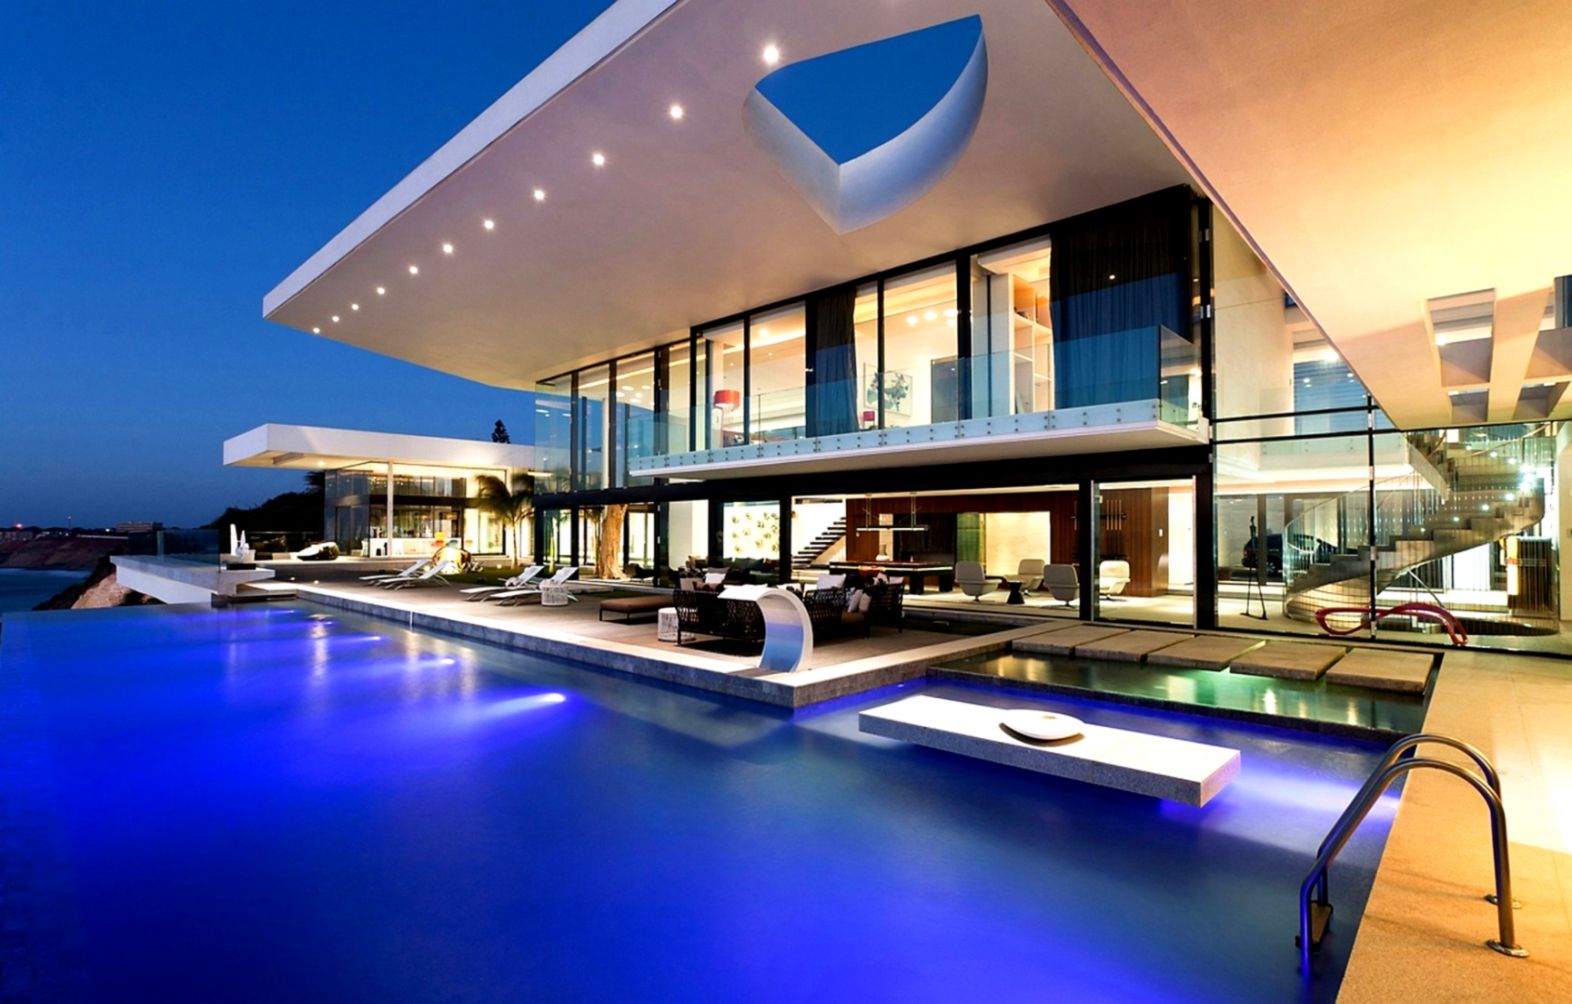 How Much Is My Home Worth The Ferro Team - Modern Big House With Pool - HD Wallpaper 